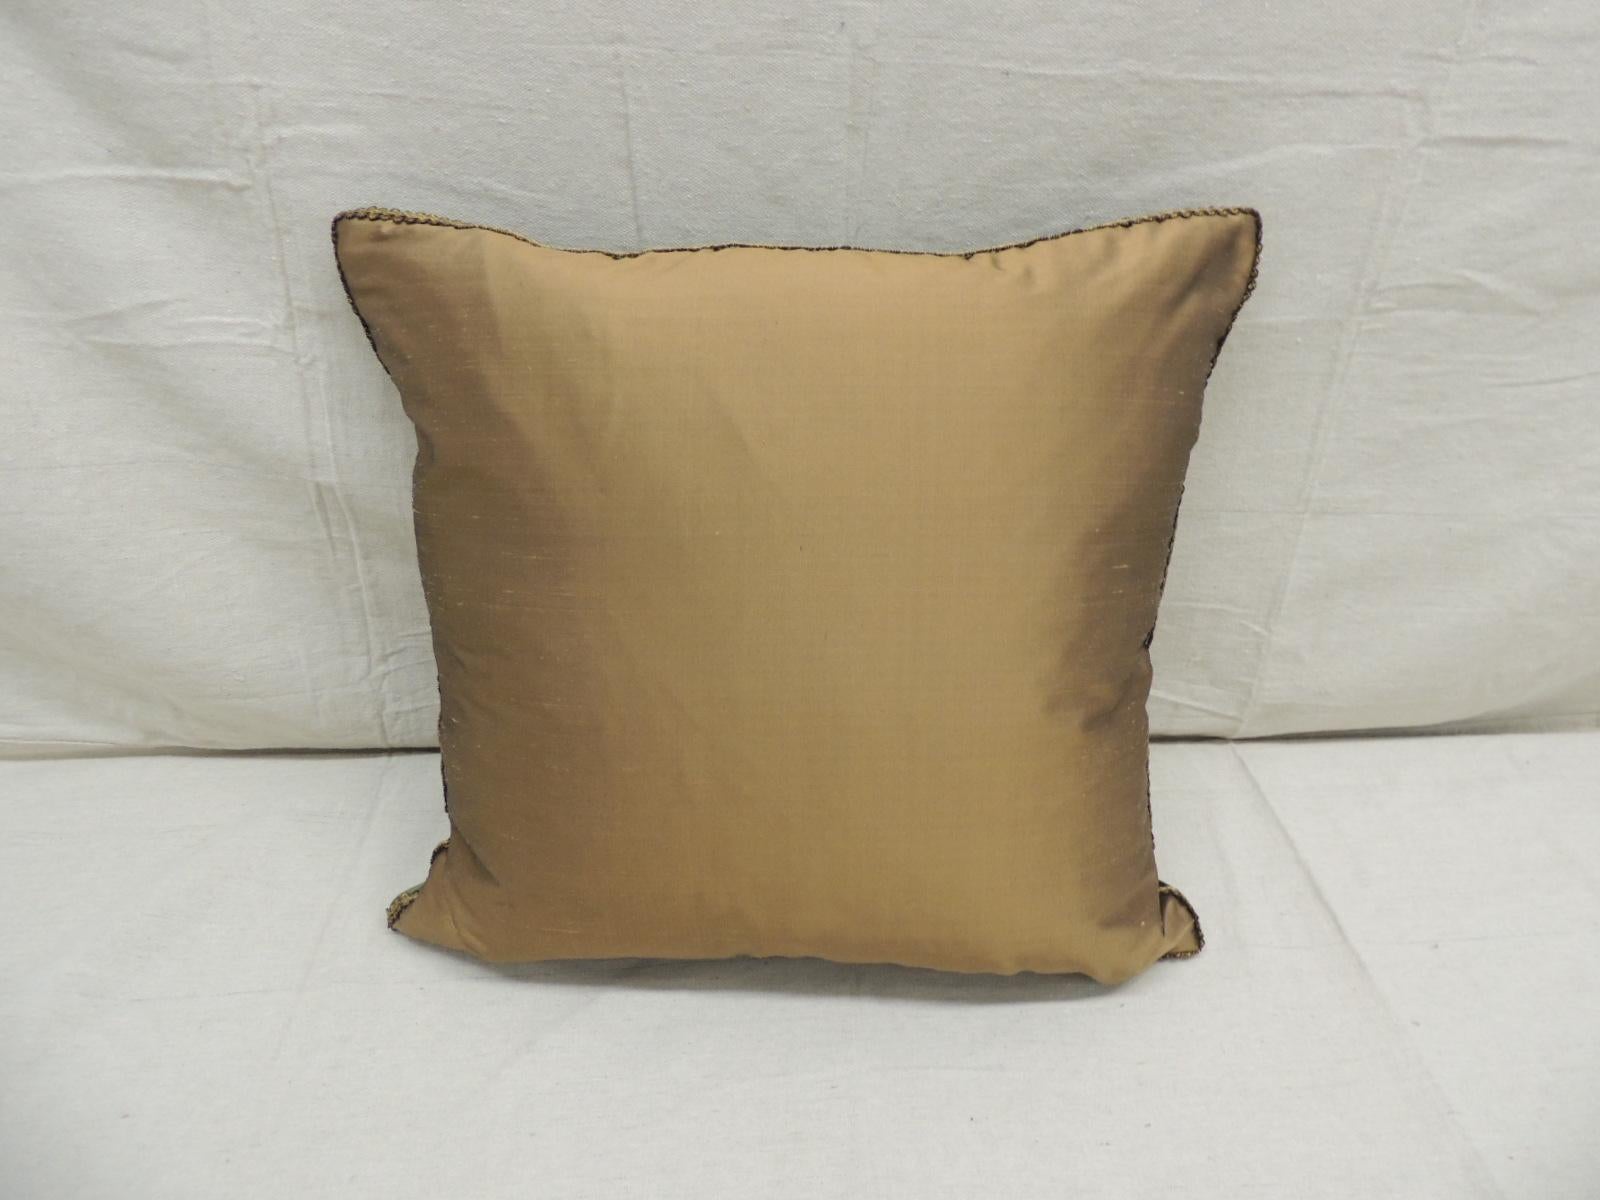 Hand-Crafted Antique Green and Gold Gaufrage Silk Velvet Square Decorative Pillow